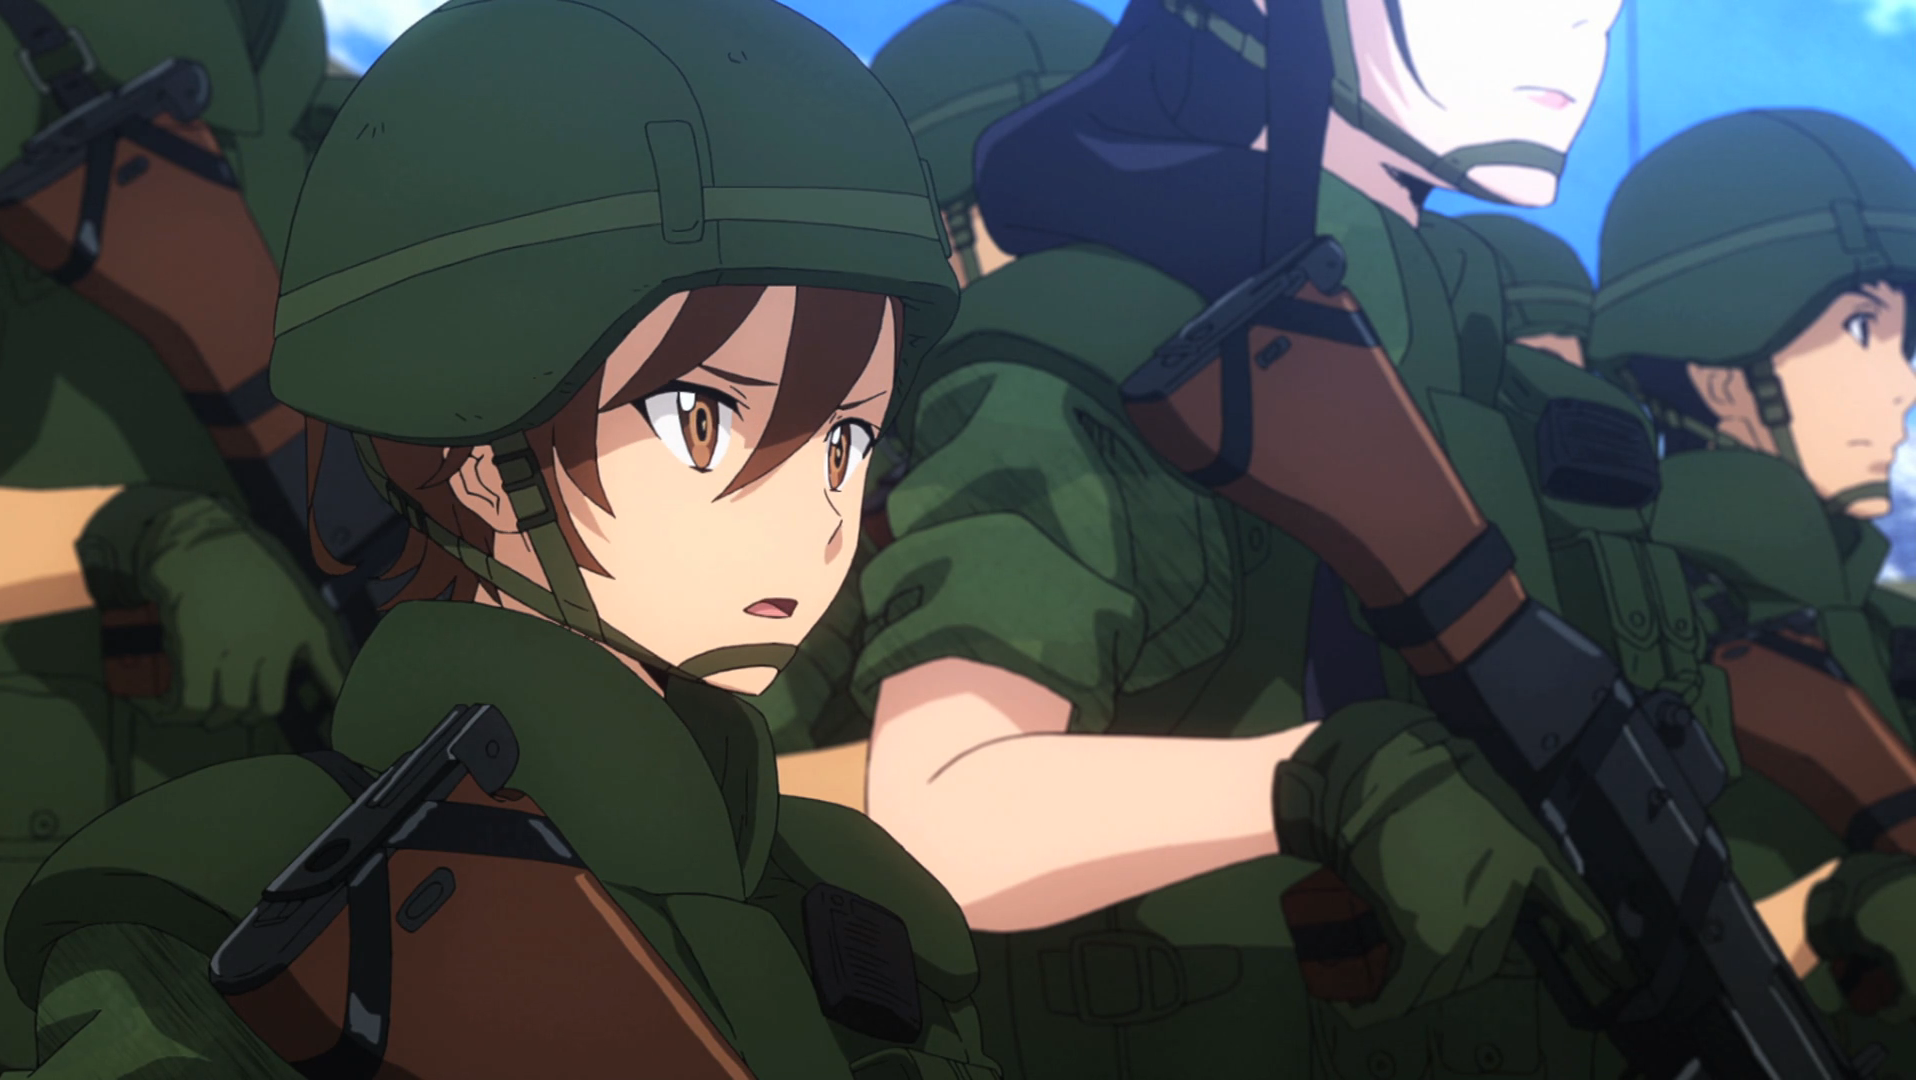 Episode 2 | Gate - Thus the JSDF Fought There! Wiki | Fandom